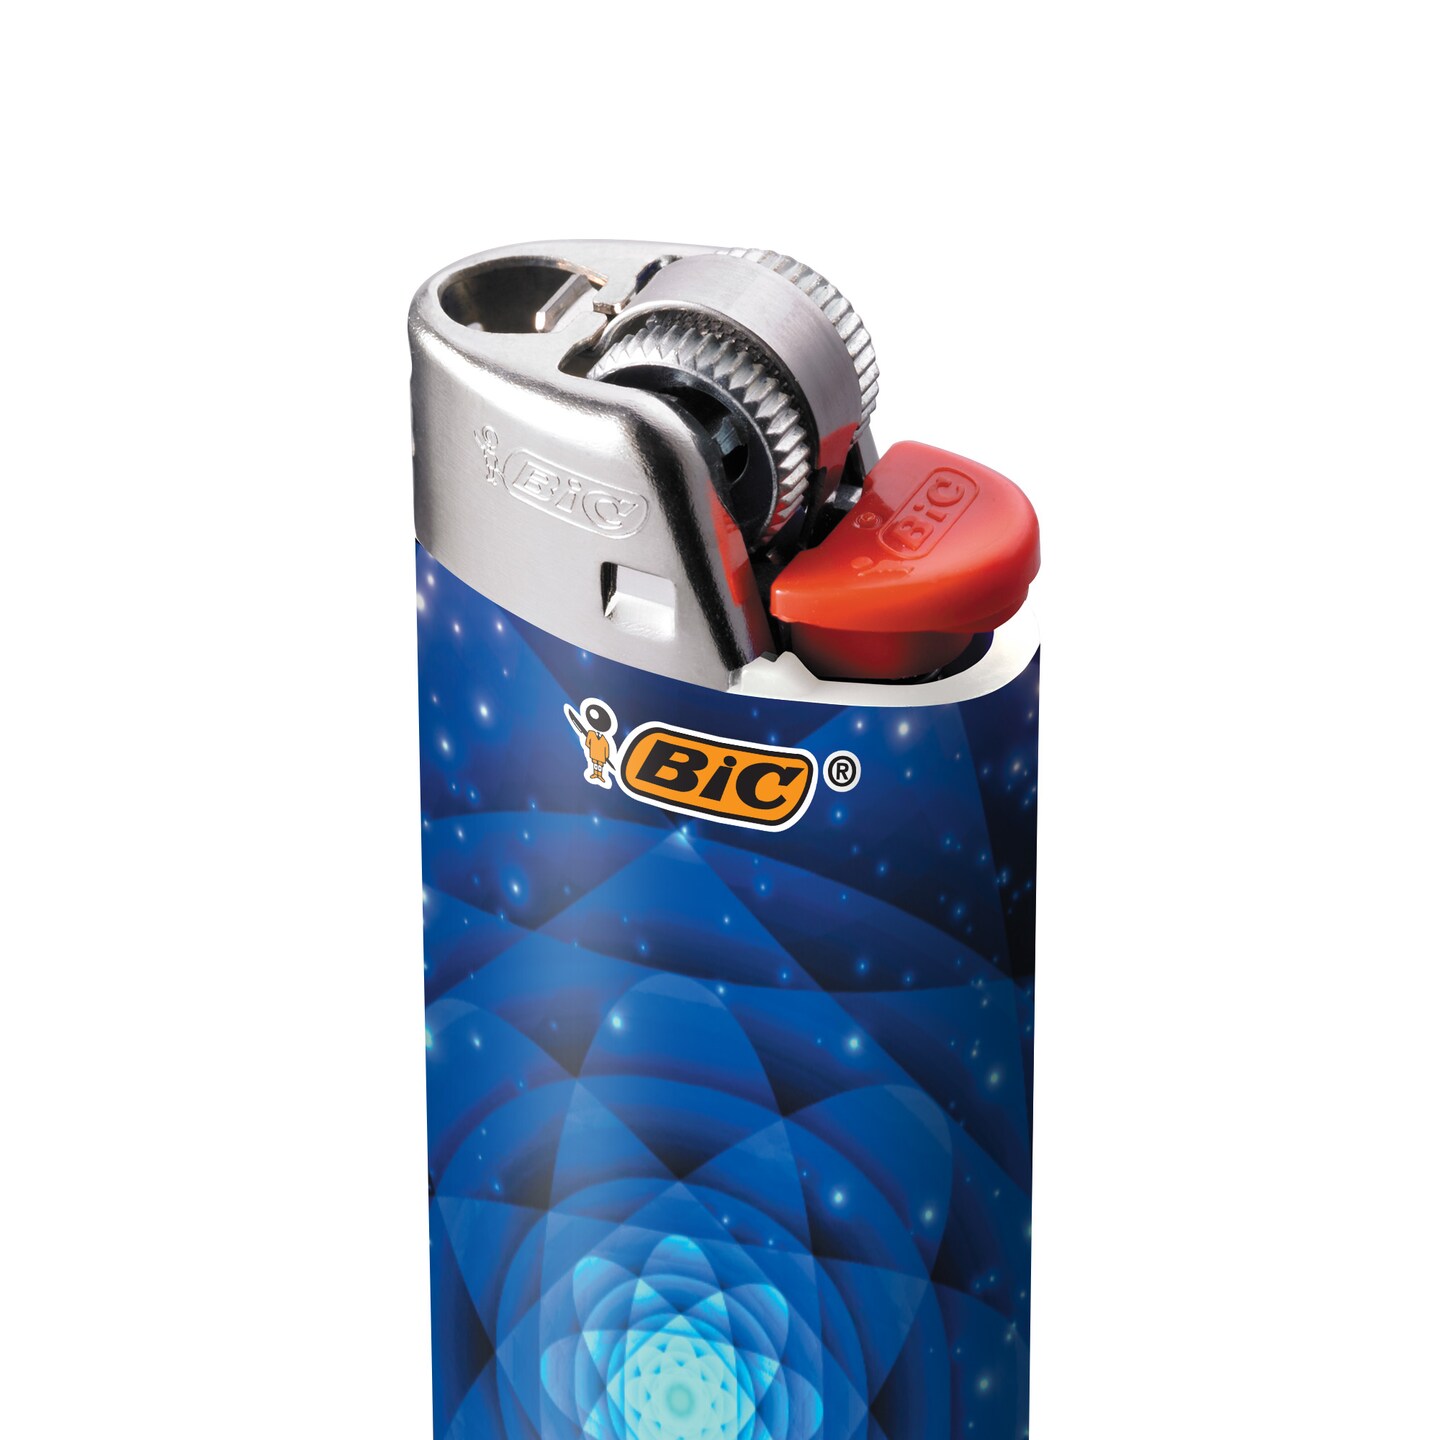 Minefelt tempo Render BIC Pocket Lighter, Special Edition Psychedelic Collection, Assorted Unique  Lighter Designs, 50 Count Tray of Lighters | Michaels